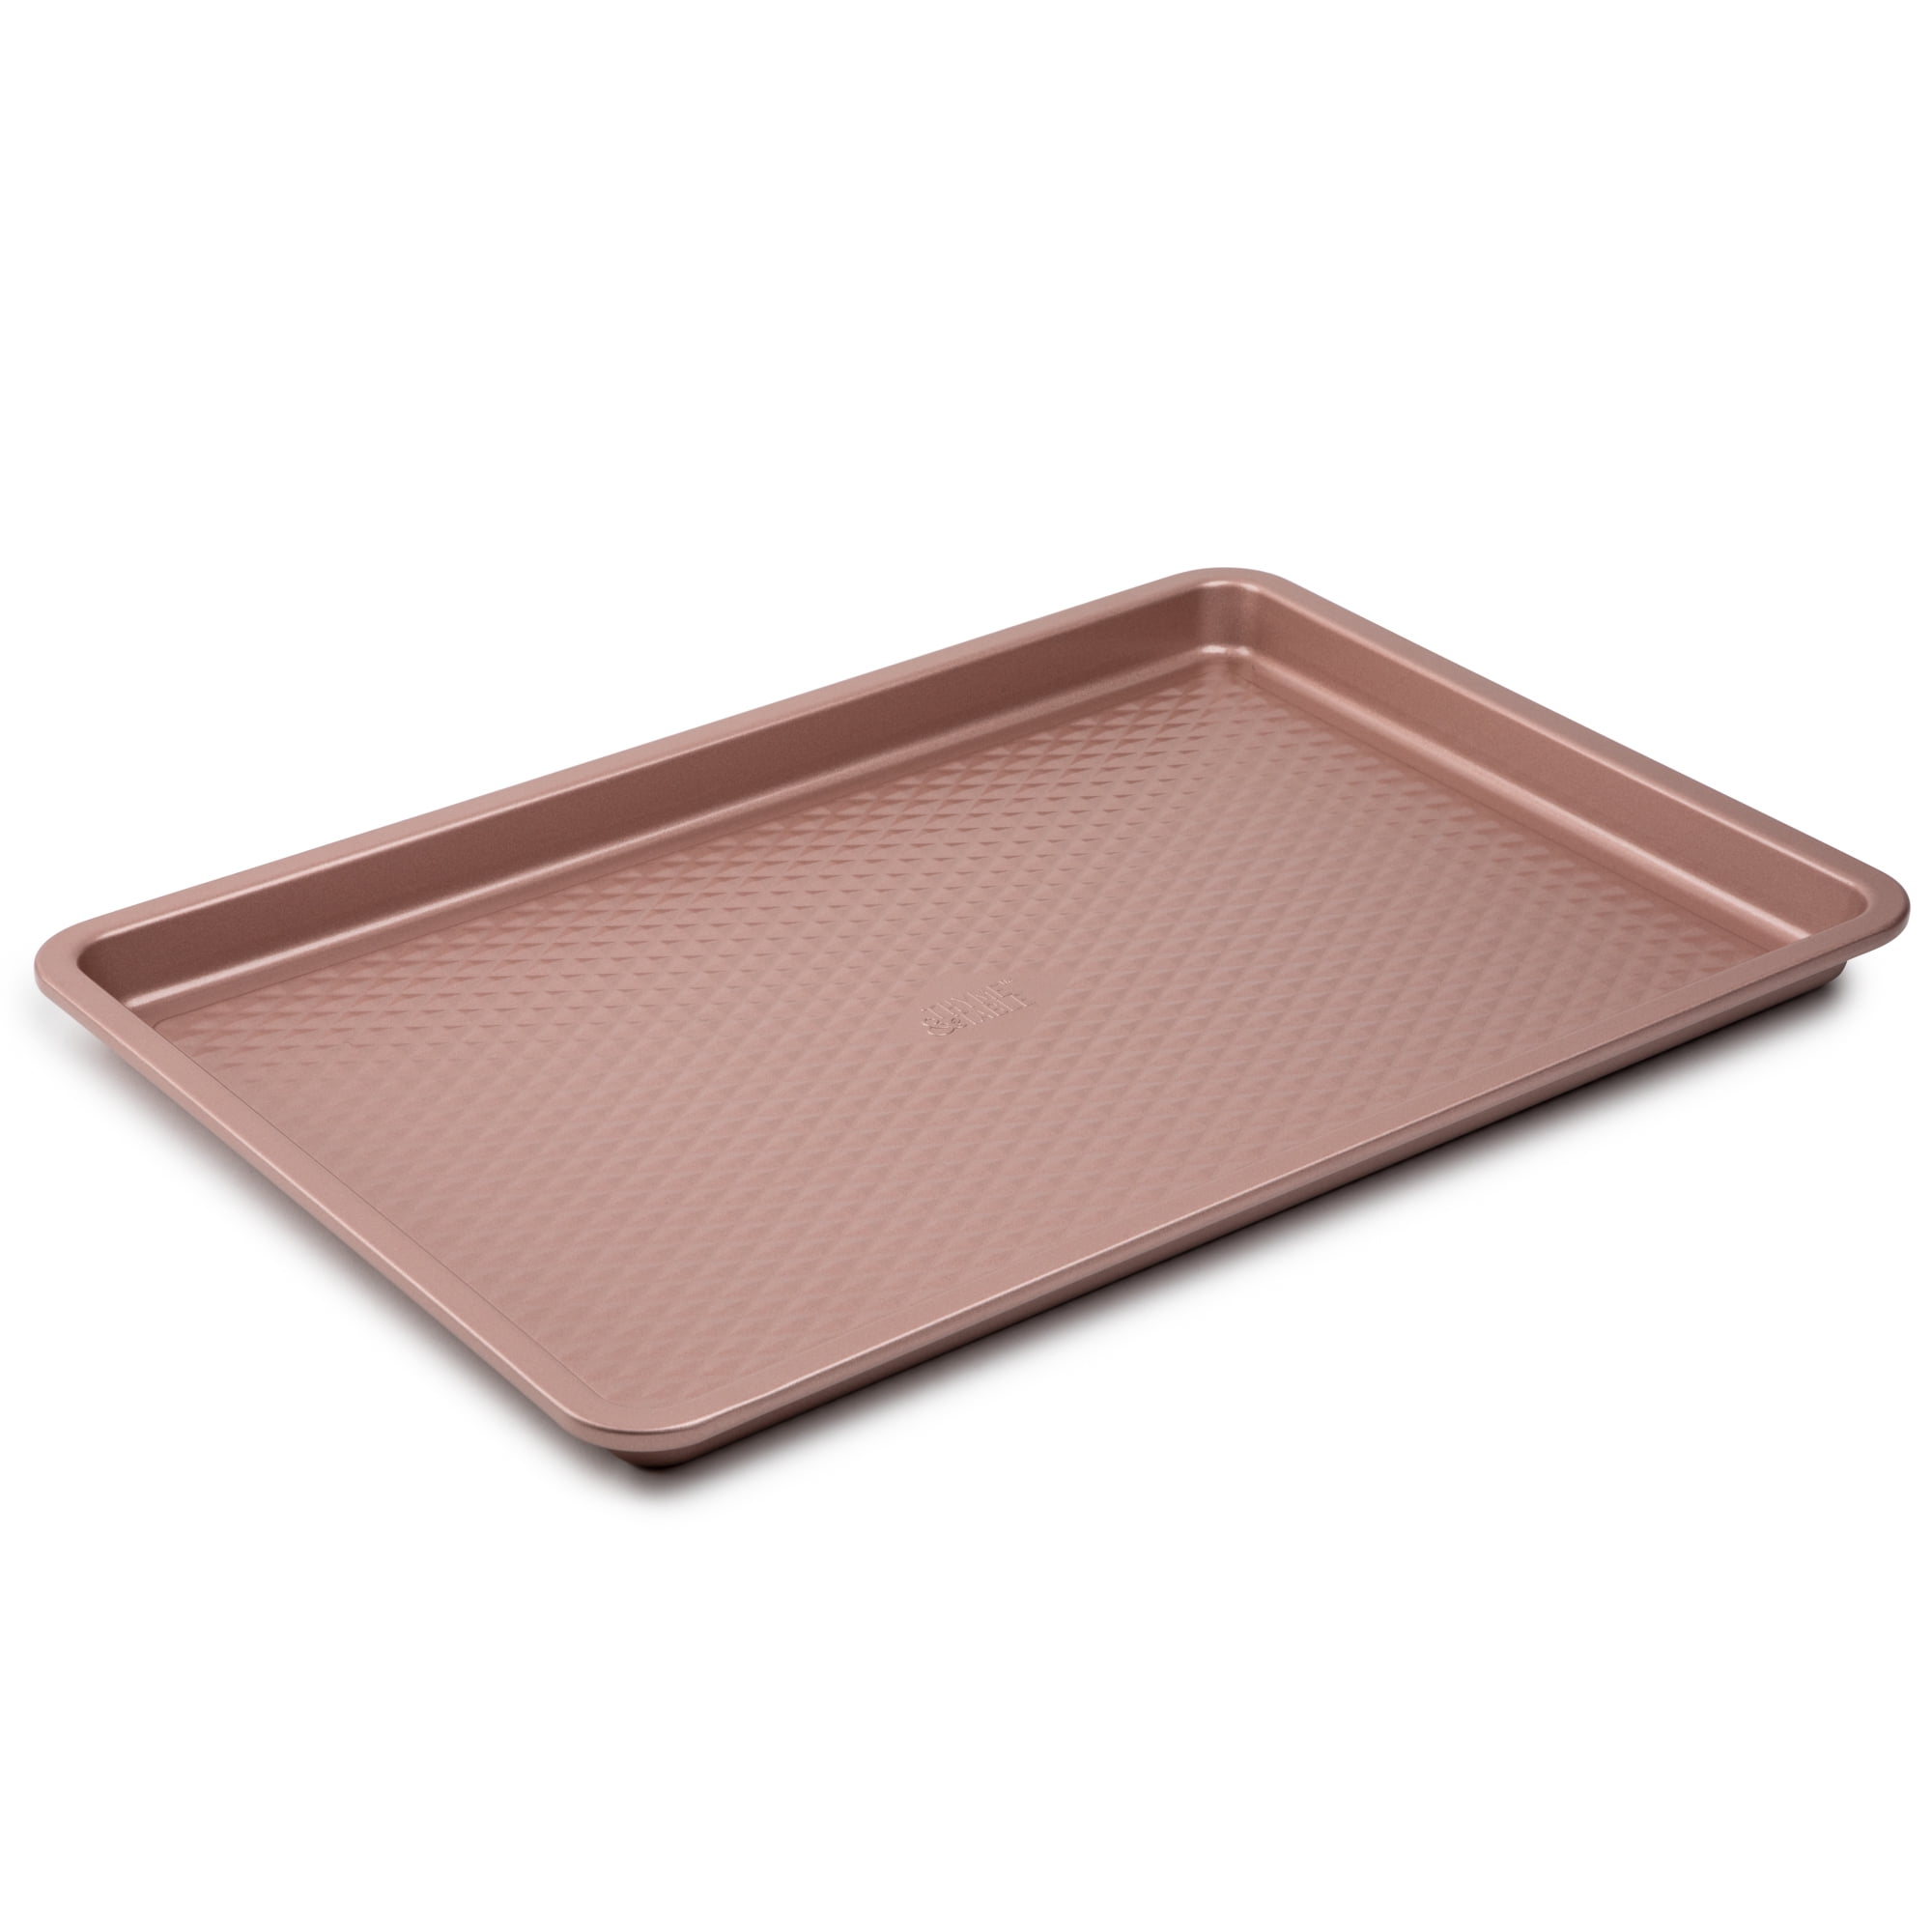 Kitchen & Table by H-E-B Gunmetal Aluminized Steel Large Cookie Sheet -  Shop Pans & Dishes at H-E-B